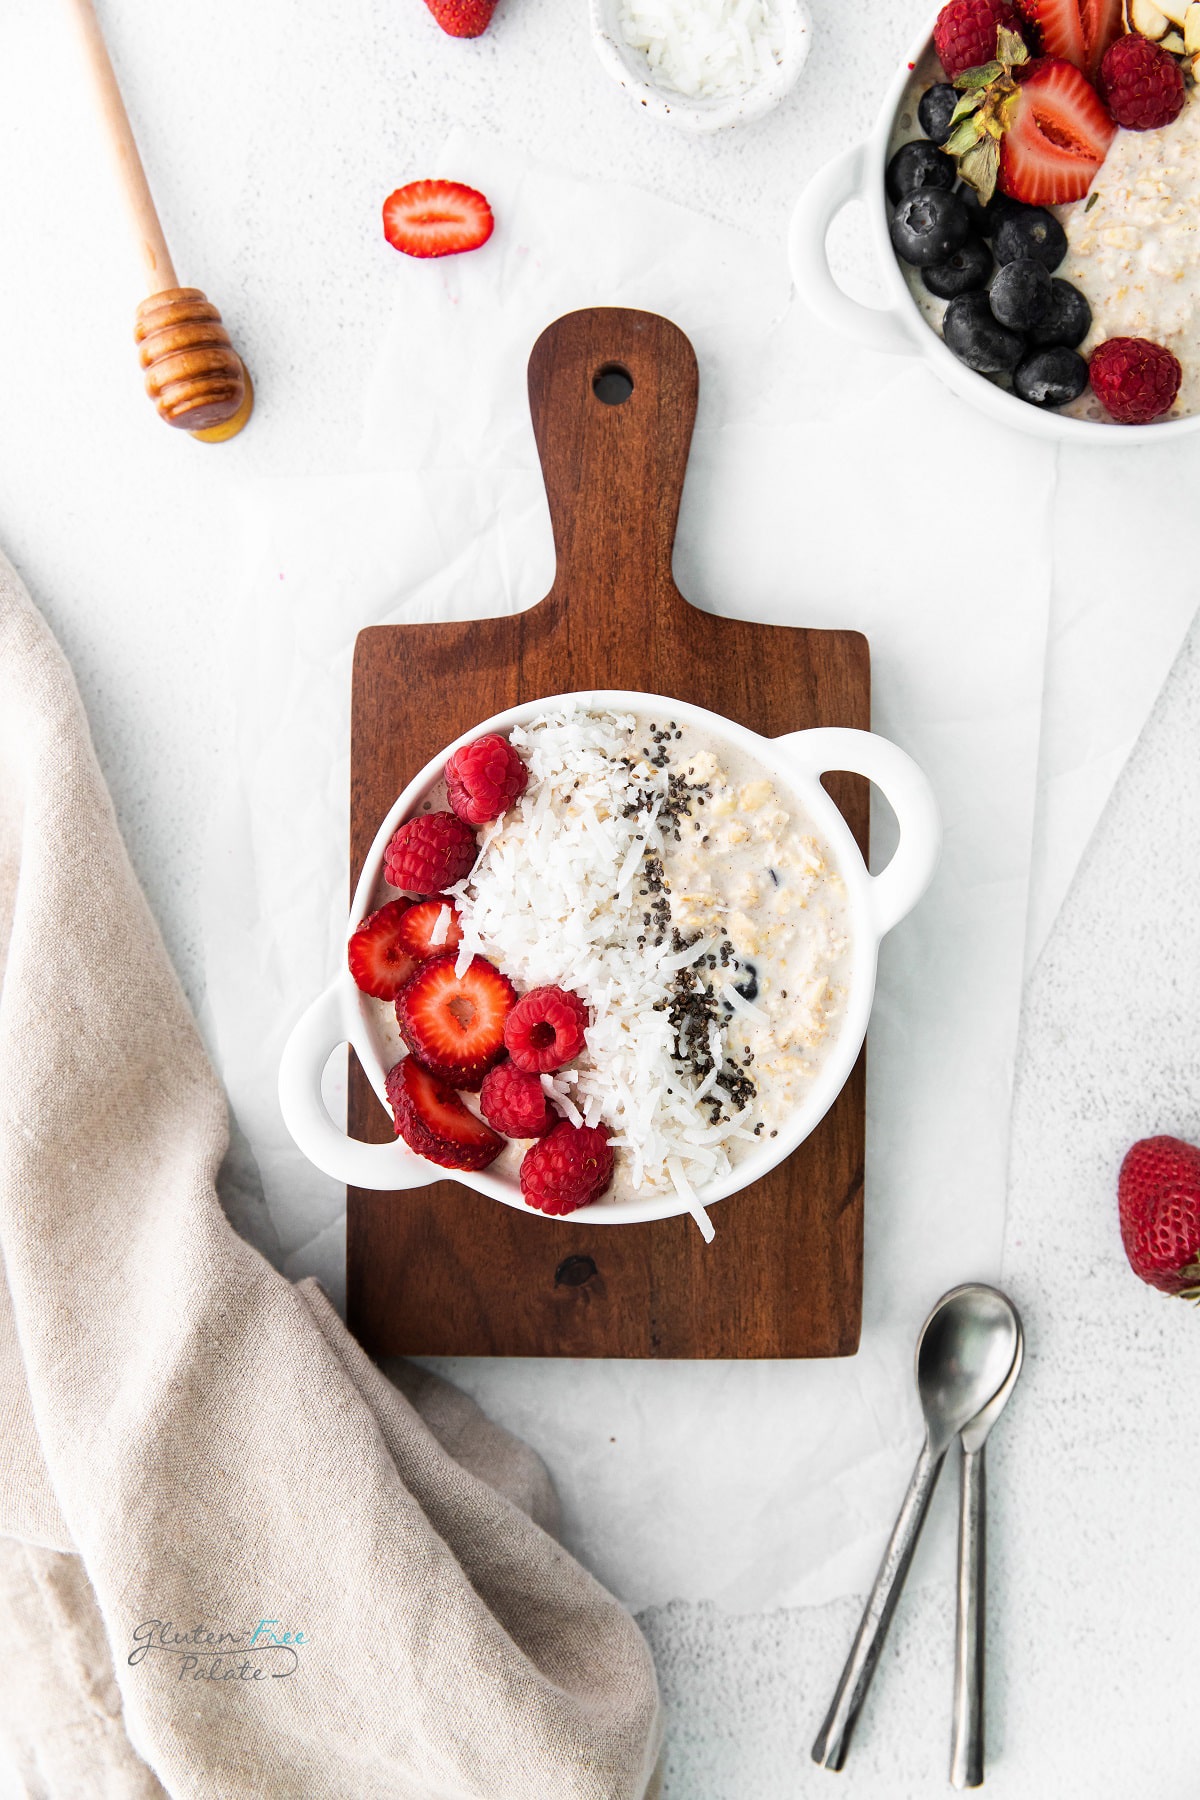 a wooden cutting board on a table, with a bowl of overnight oats with berries, coconut toppings. another bowl is nearby with blueberries and strawberries in it. A honey dipper is on the table as well.